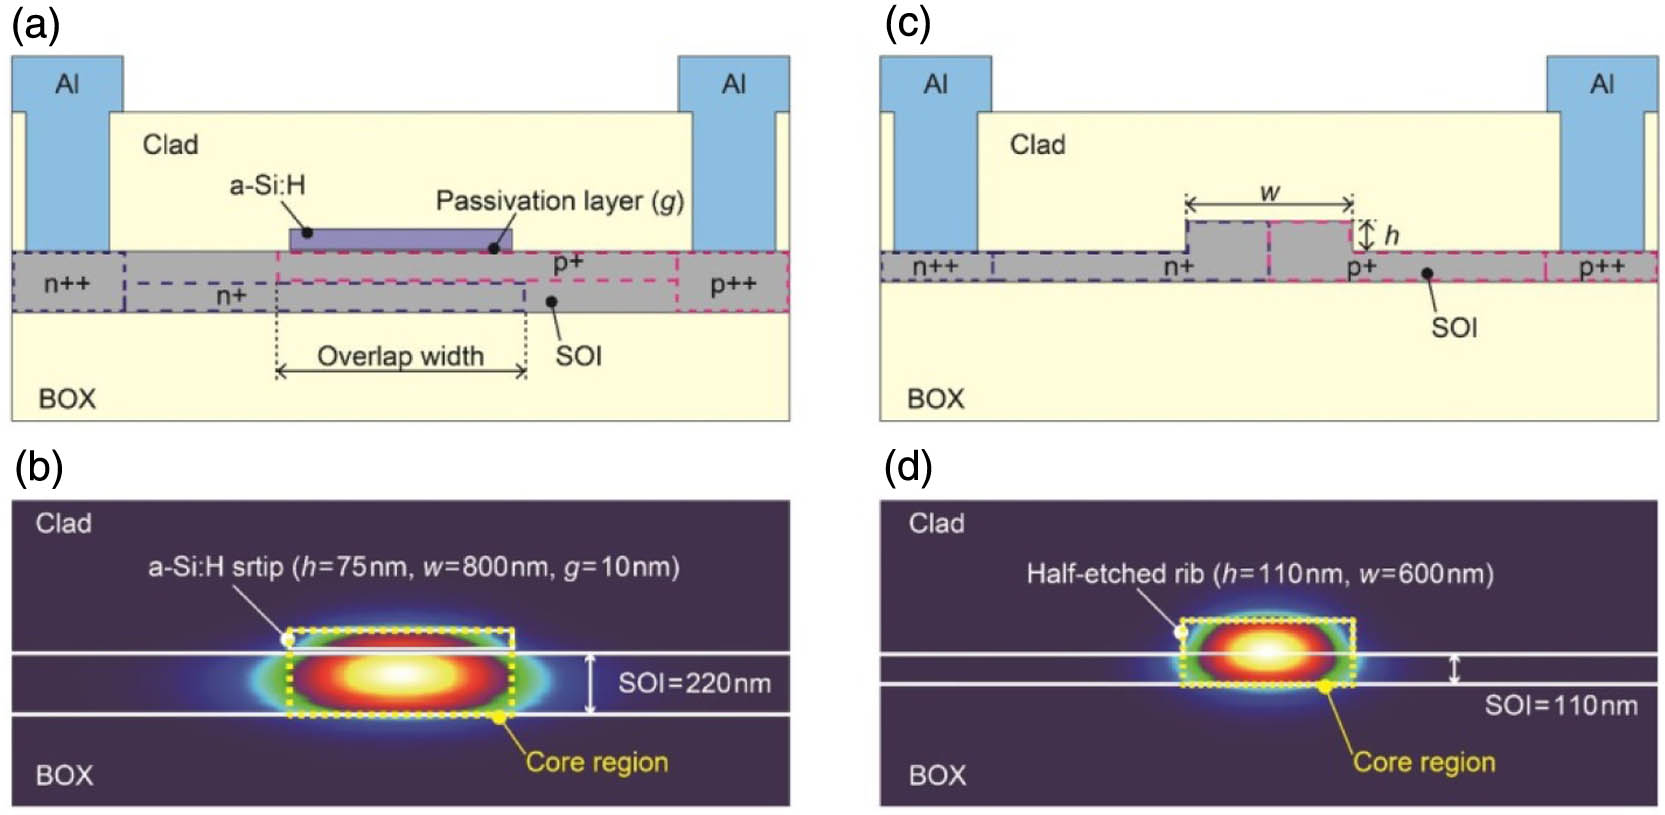 (a) Cross-sectional schematic of the proposed a-Si:H strip-loaded modulator. (b) Optical field of strip-loaded waveguide for 75 nm thick and 800 nm wide a-Si:H strip. (c) Cross-sectional schematic of a rib waveguide for conventional modulators. (d) Optical field of rib waveguide for 110 nm high and 600 nm wide rib.